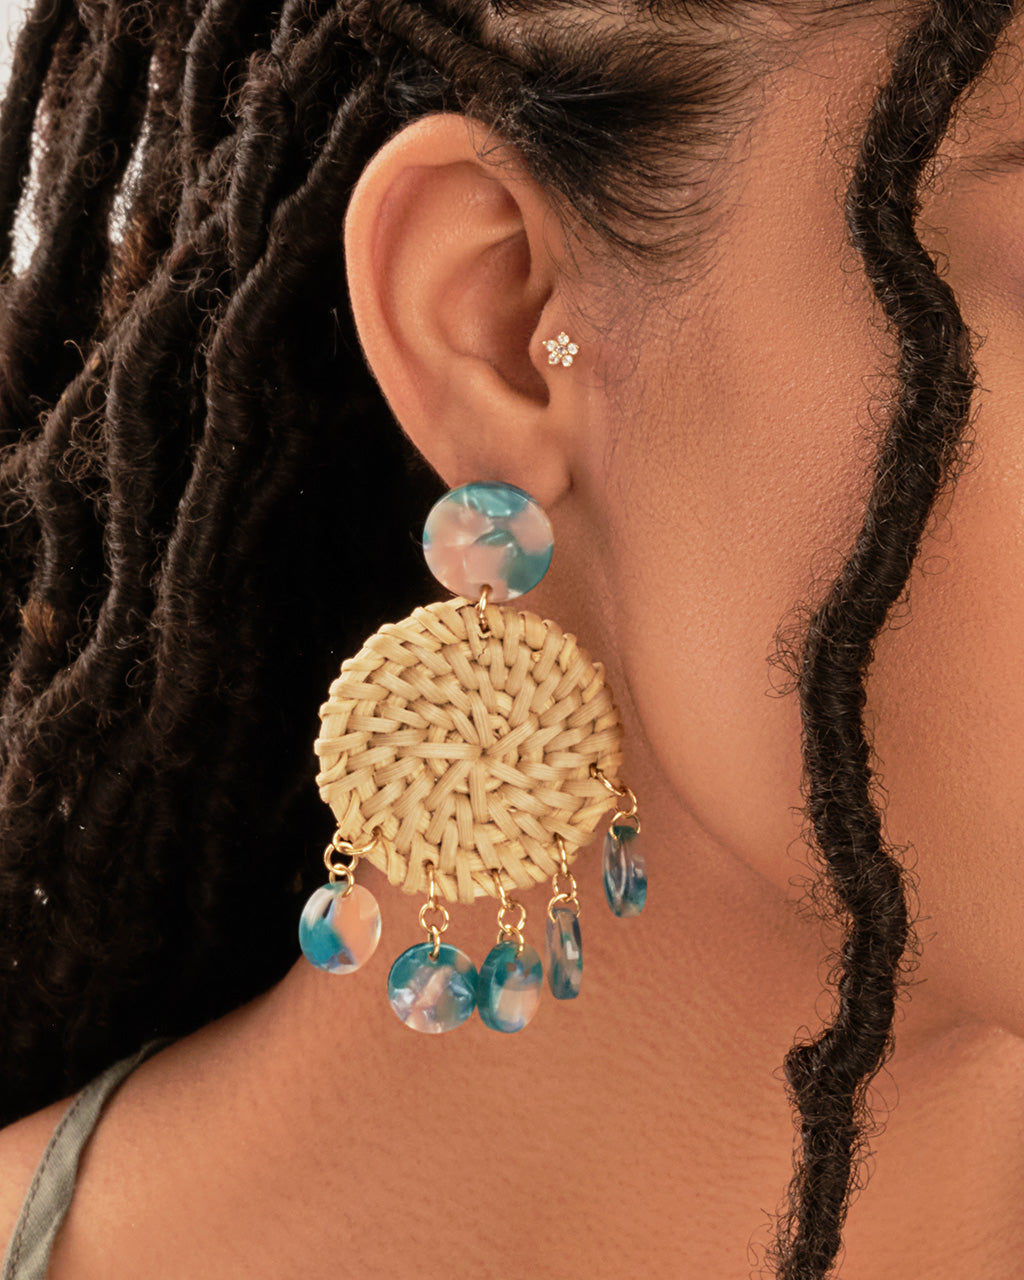 Woven Stud Drop with Resin Earring Sterling Forever 